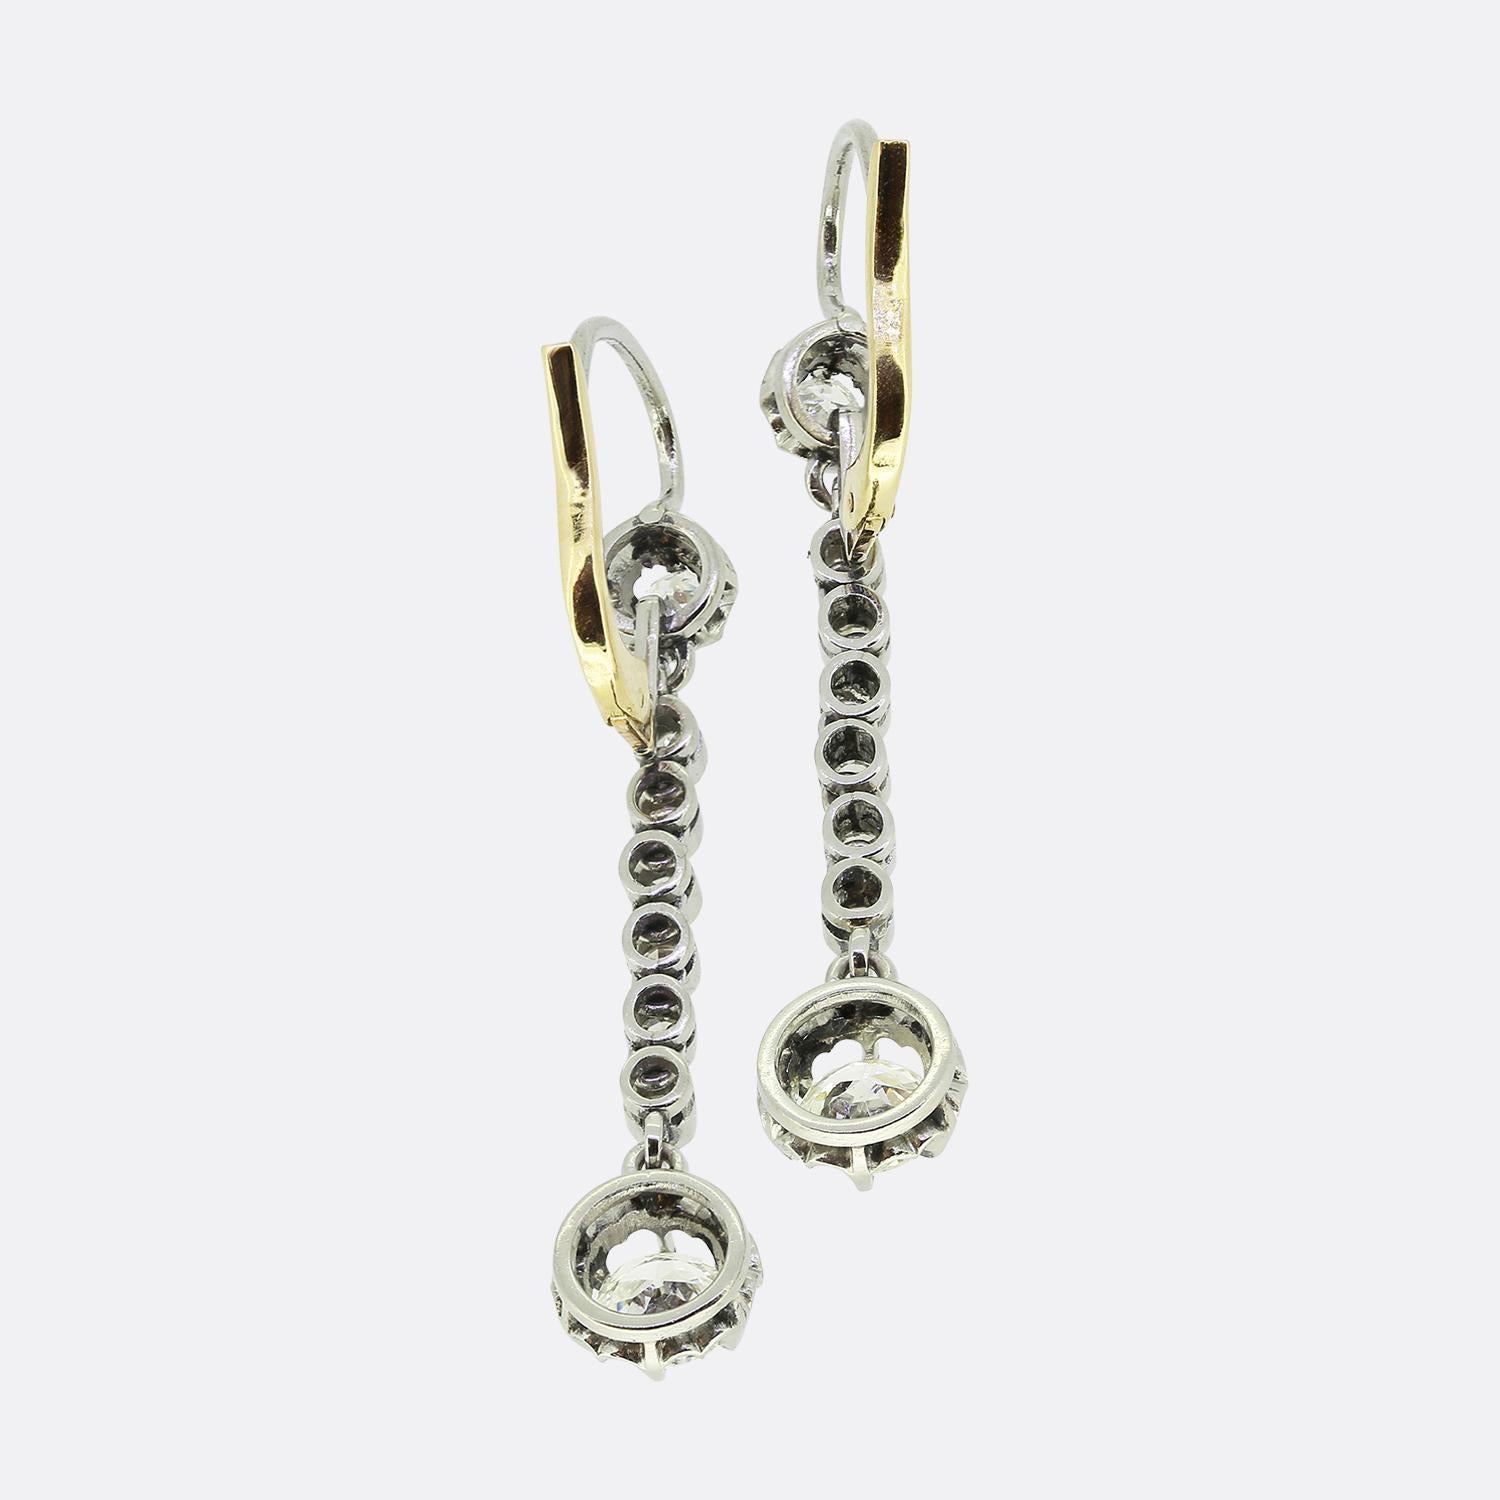 Here we have an elegant pair of diamond drop earrings dating back to the Edwardian period. Both pieces showcase a single round faceted old European cut diamond at the top which sits in a buttercup setting and plays host to a single row of freely